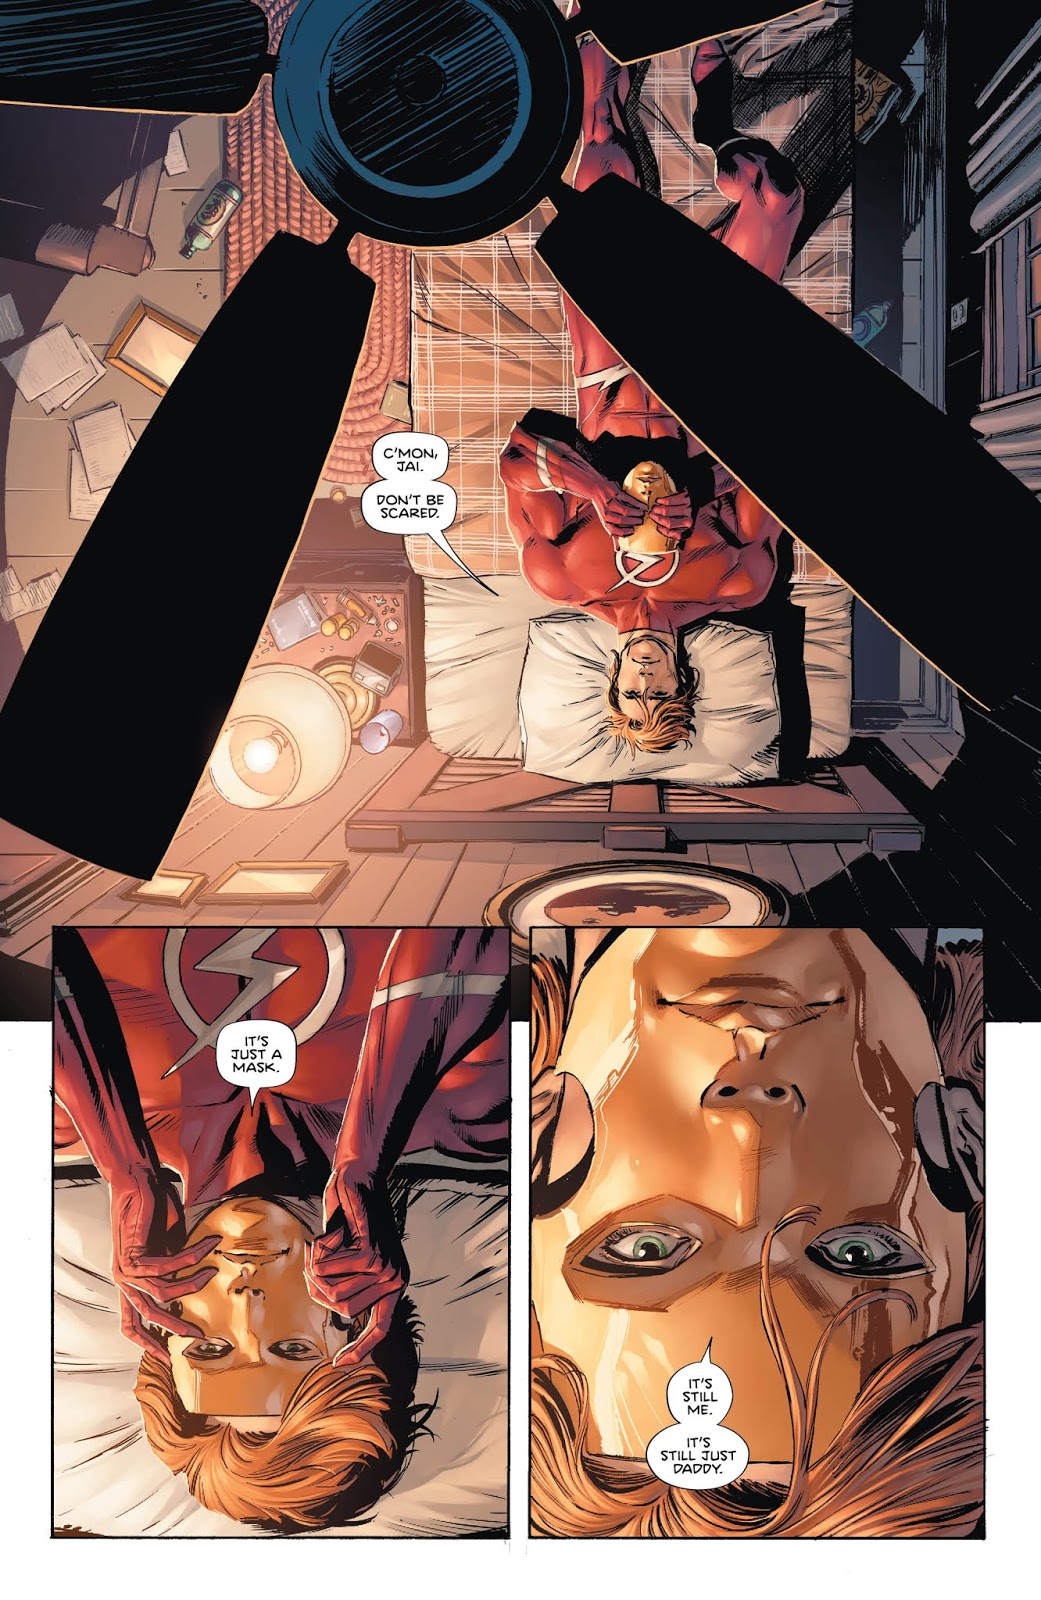 salut fordøjelse Søgemaskine optimering Weird Science DC Comics: Heroes in Crisis #3 Review and **SPOILERS**